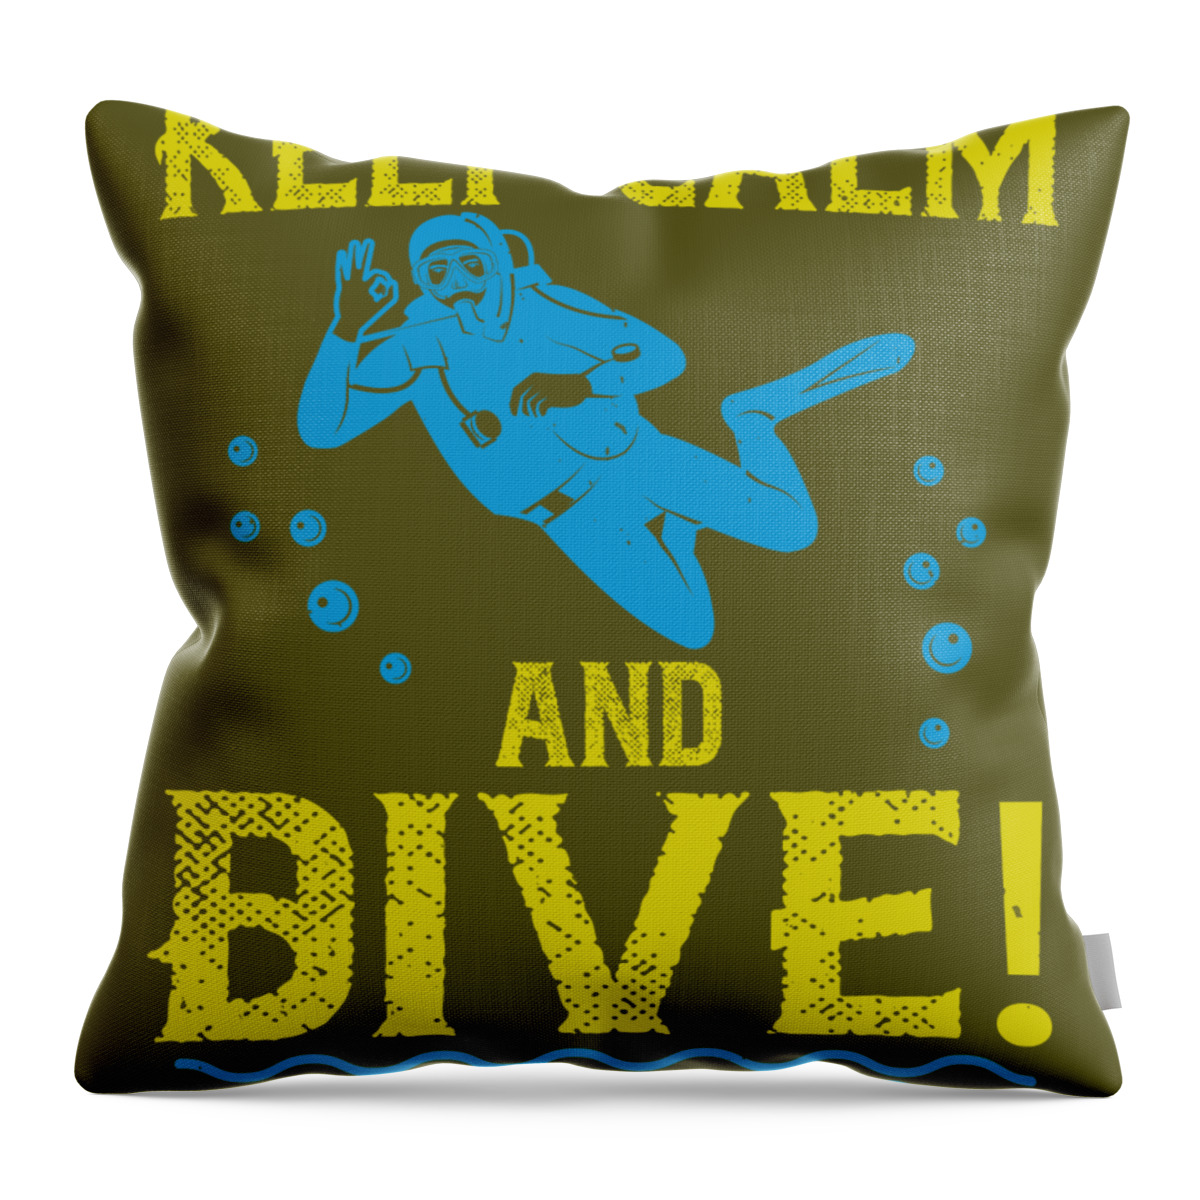 Diver Throw Pillow featuring the digital art Diver Gift Keep Calm And Dive Diving by Jeff Creation